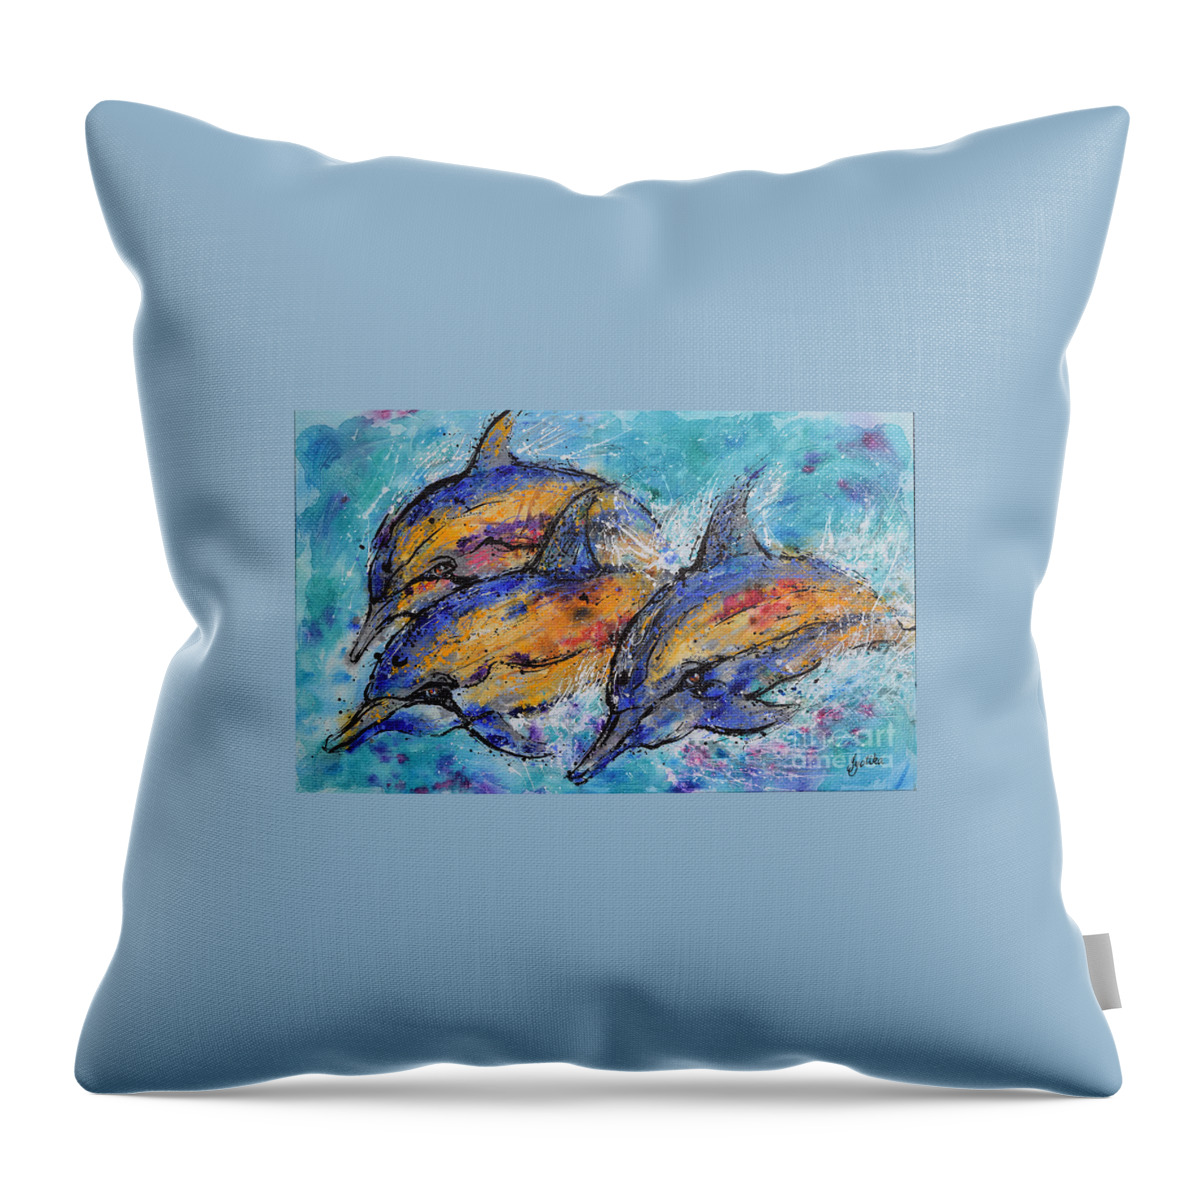 Dolphins Throw Pillow featuring the painting Playful Dolphins by Jyotika Shroff